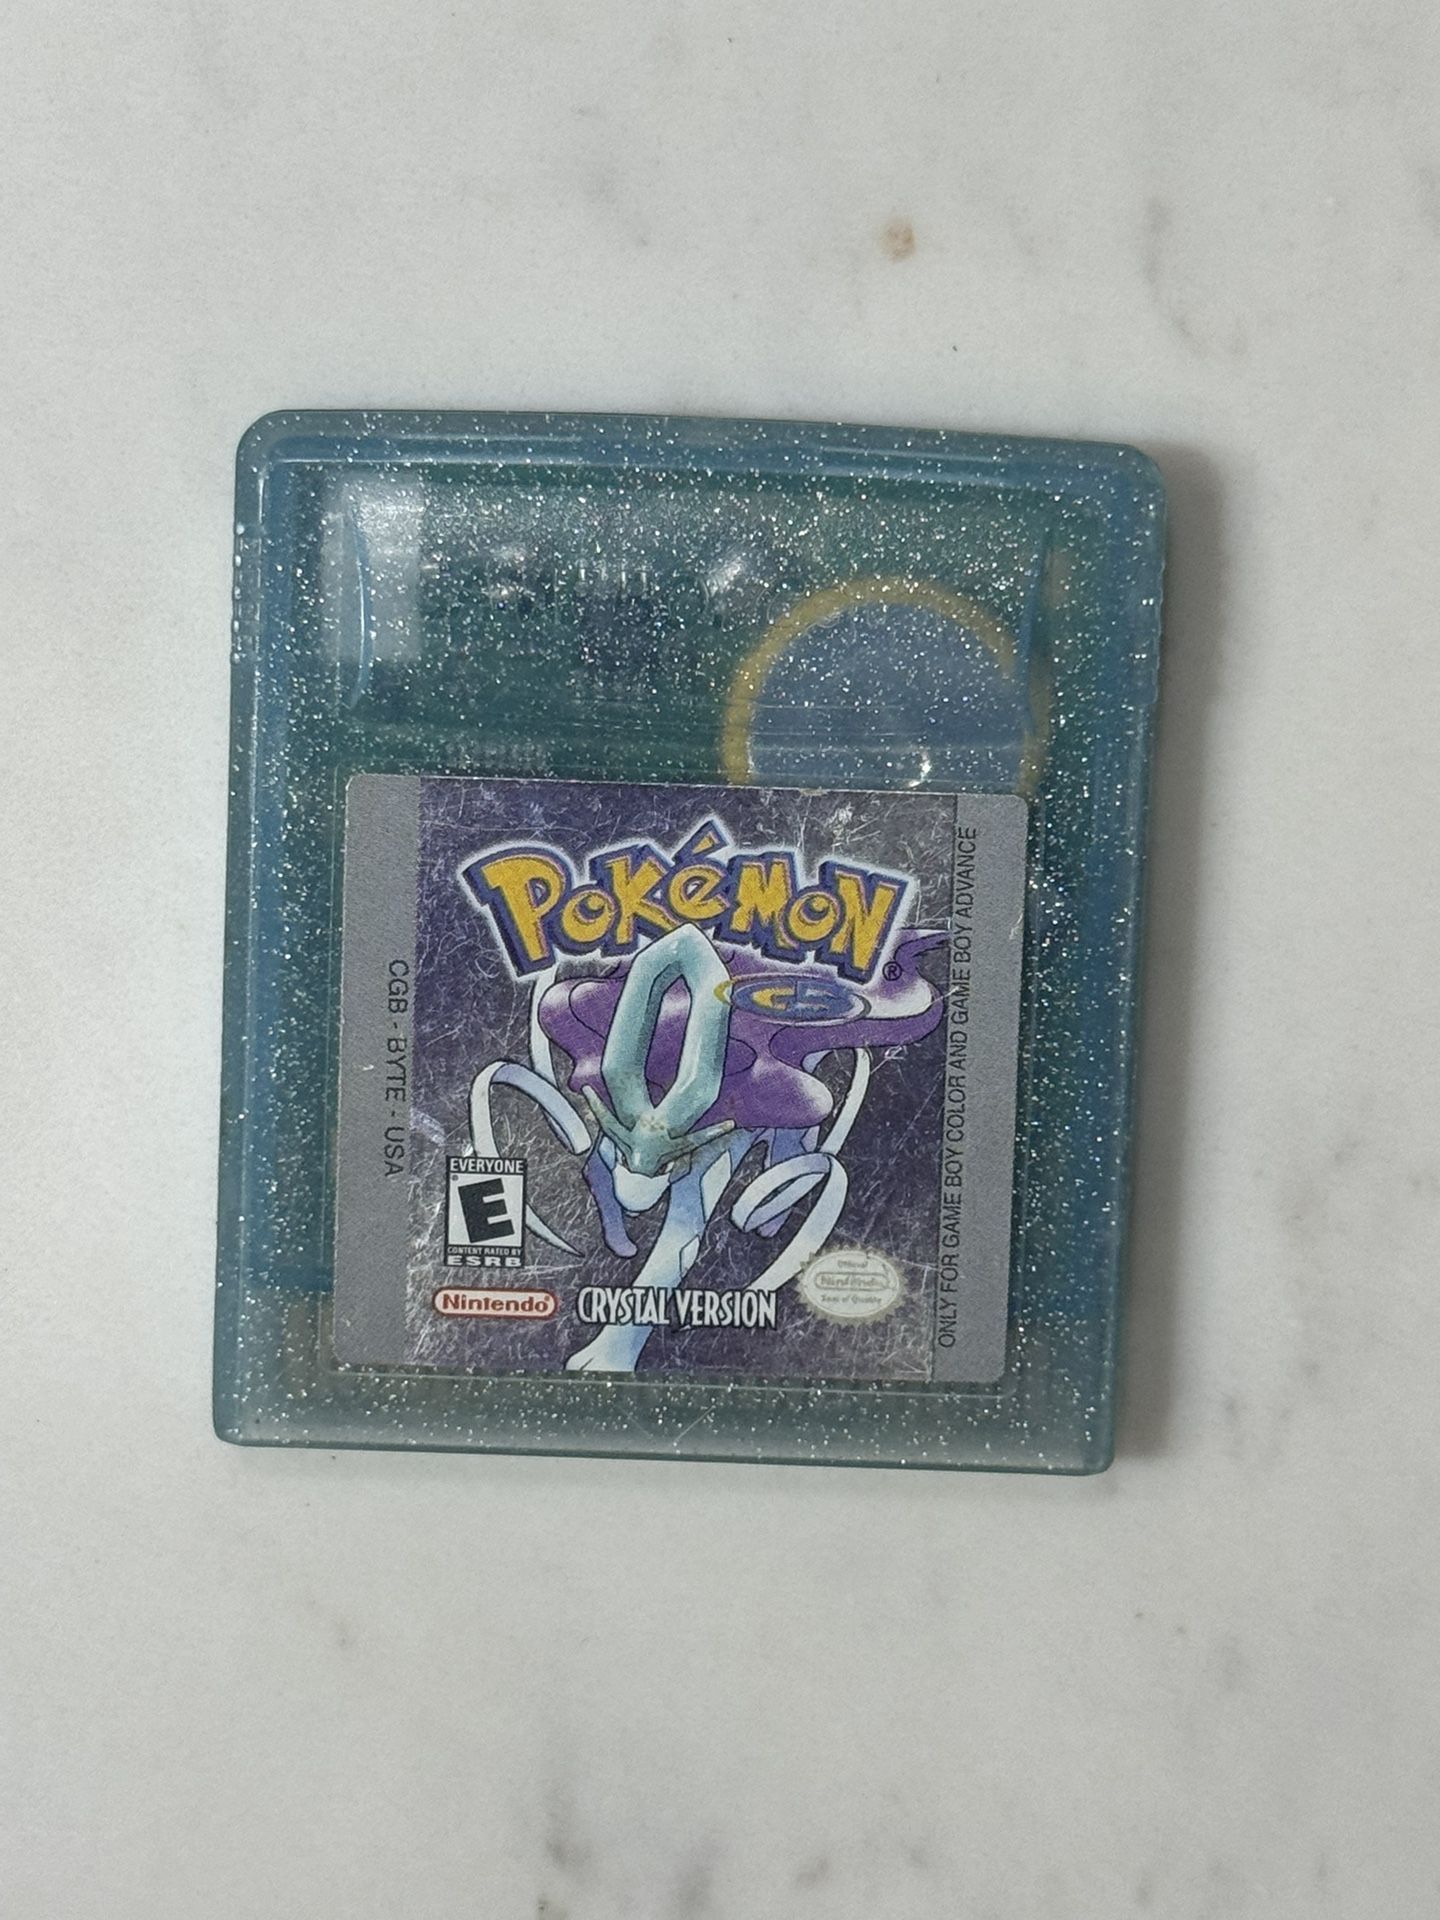 Pokemon Crystal Version W/ New Battery Authentic Nintendo Gameboy Color GAME